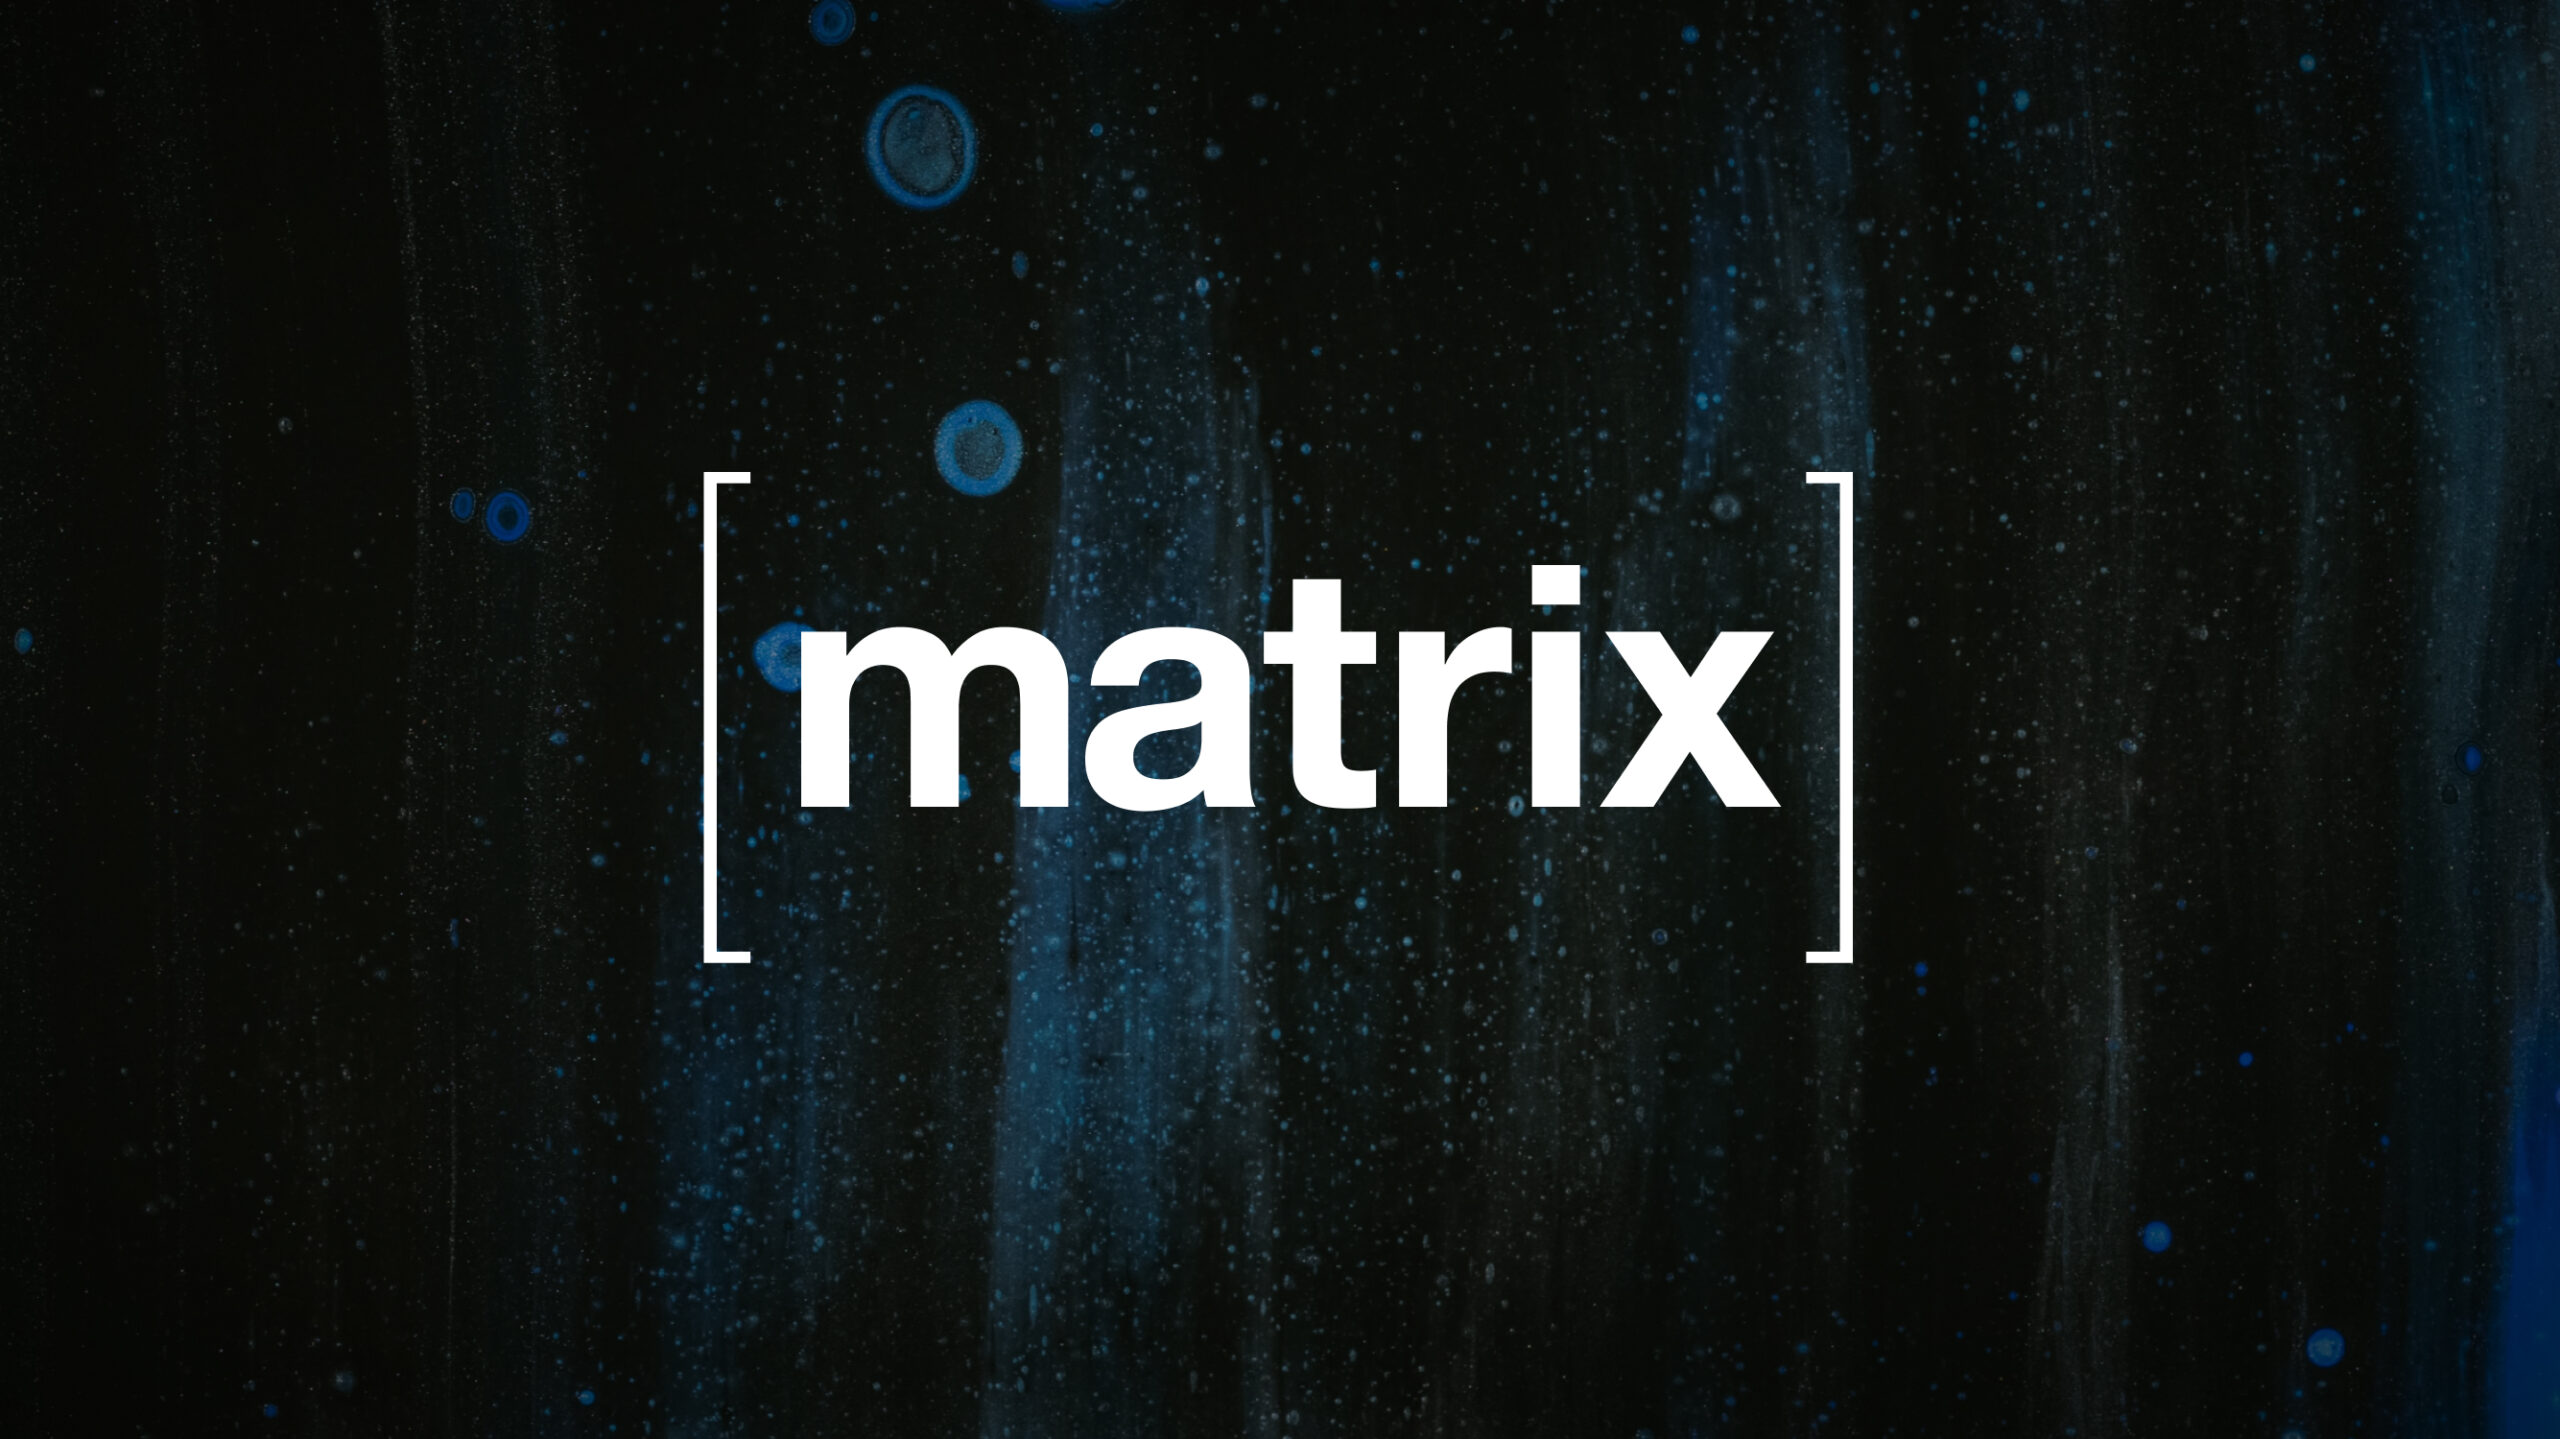 The logo for Matrix - the secure, decentralized communication protocol